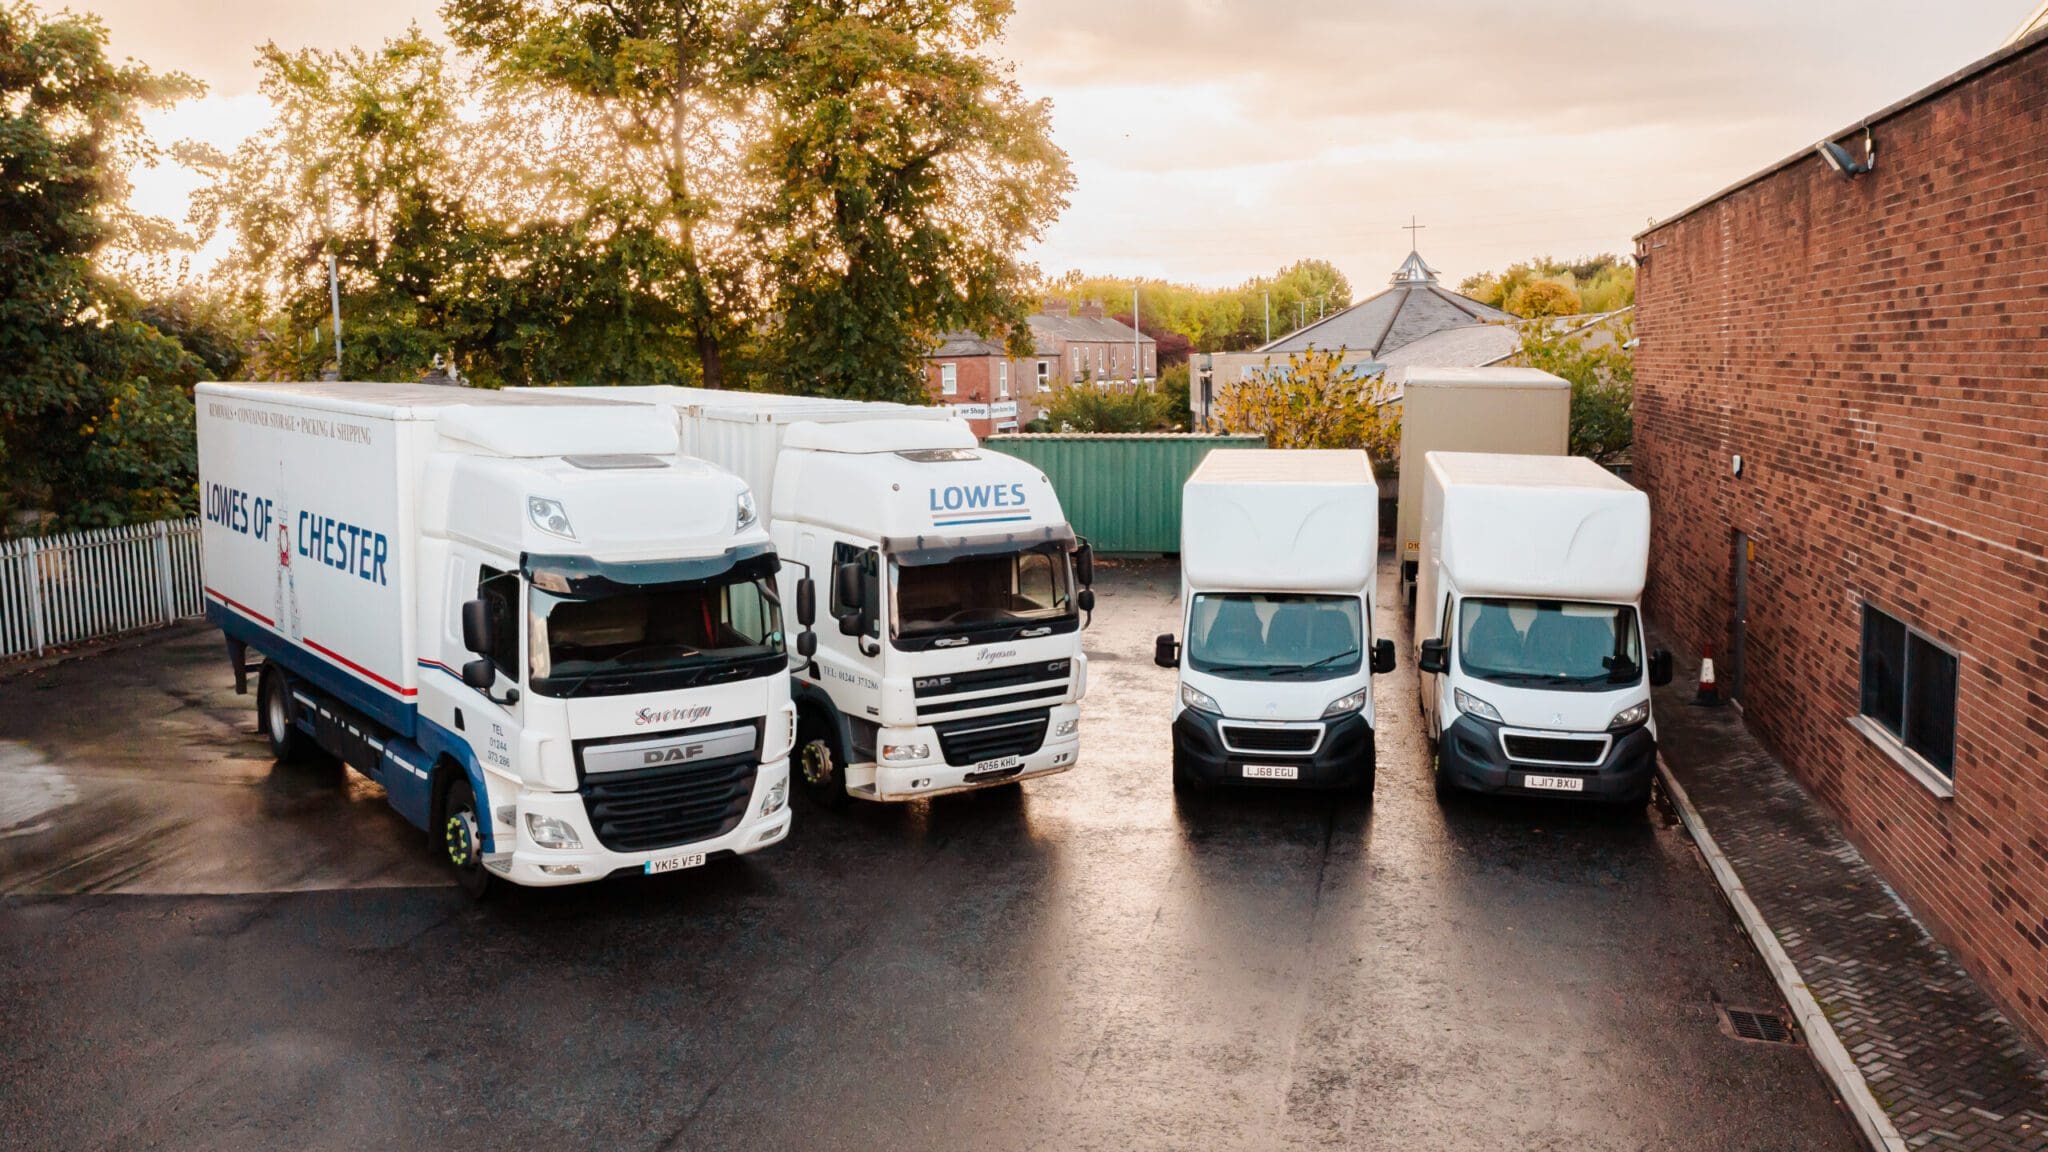 The four trucks of Lowes of Chester